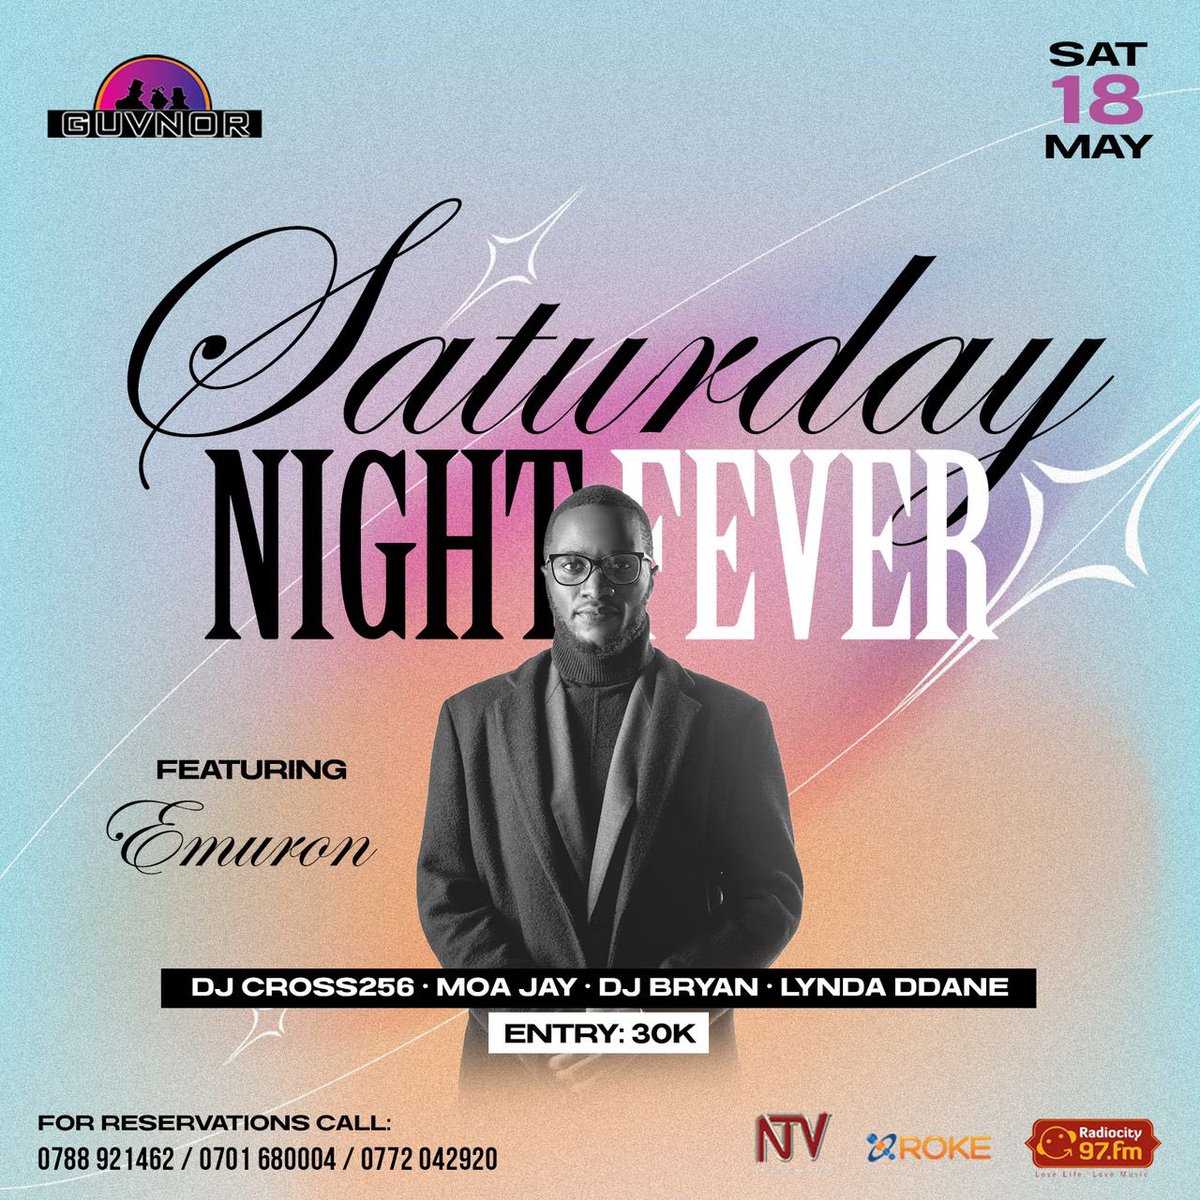 ‼️‼️‼️GUYS GUYS GUYS‼️‼️‼️ Kindly Join me This Saturday (18th) at GUVNOR. @GuvnorUganda I’m hosting on that night! Featuring @lynda_ddane @djmoajay_ Hope to see you there ‼️